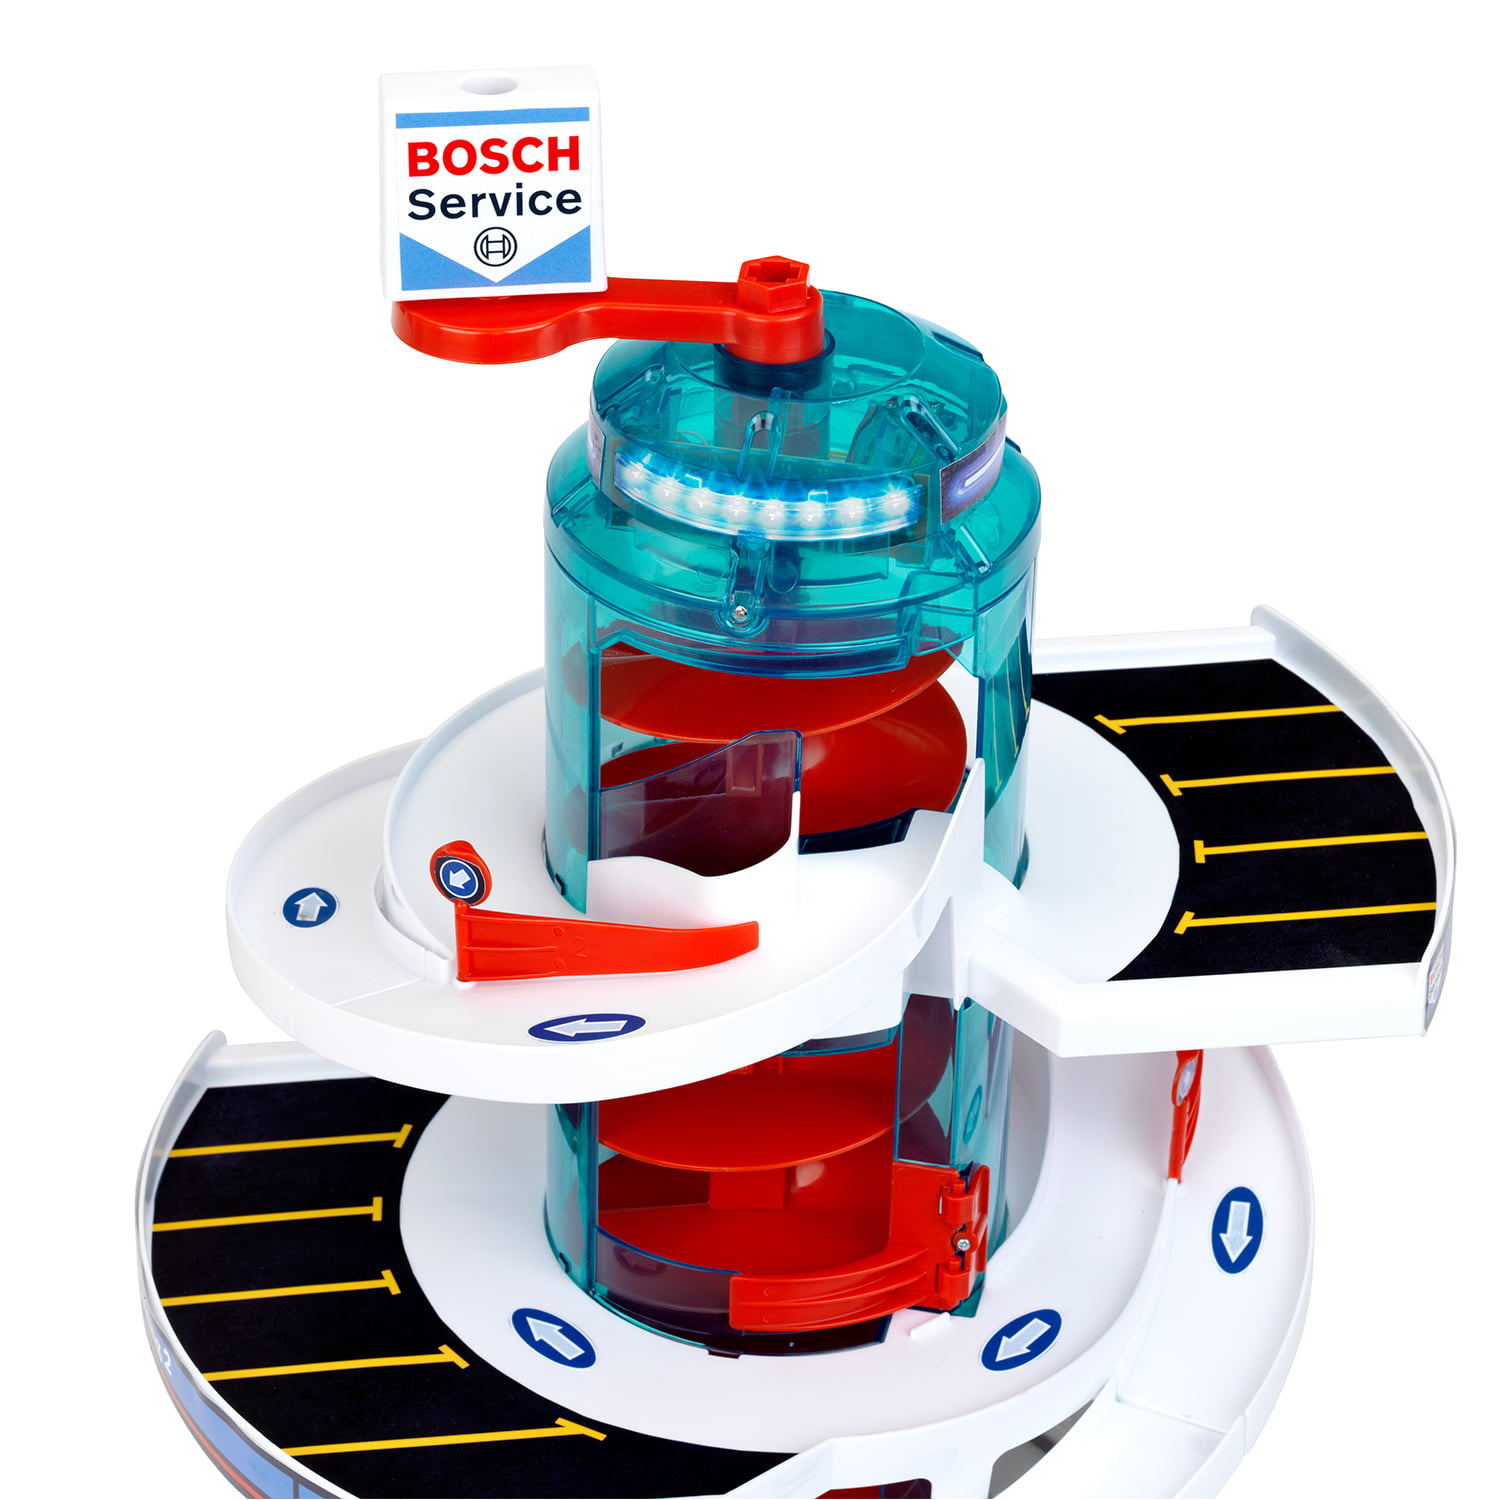 Get a Bosch NOW for $329 - Hurry! - Between Carpools